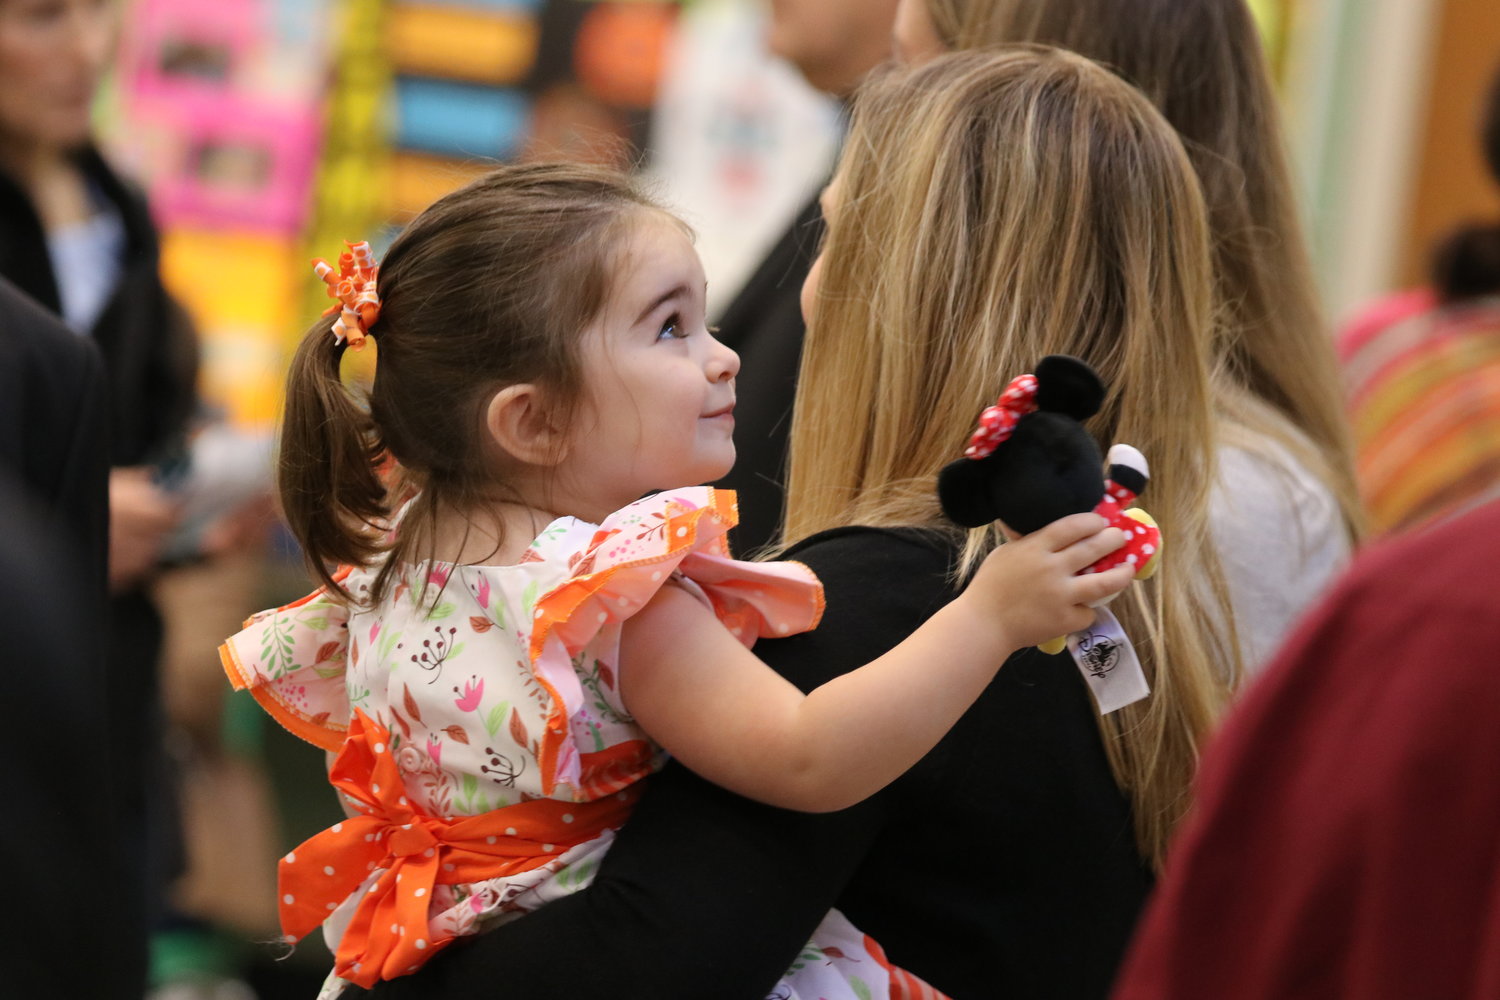 A mom and daughter wait for the ceremony to begin in the school gym.